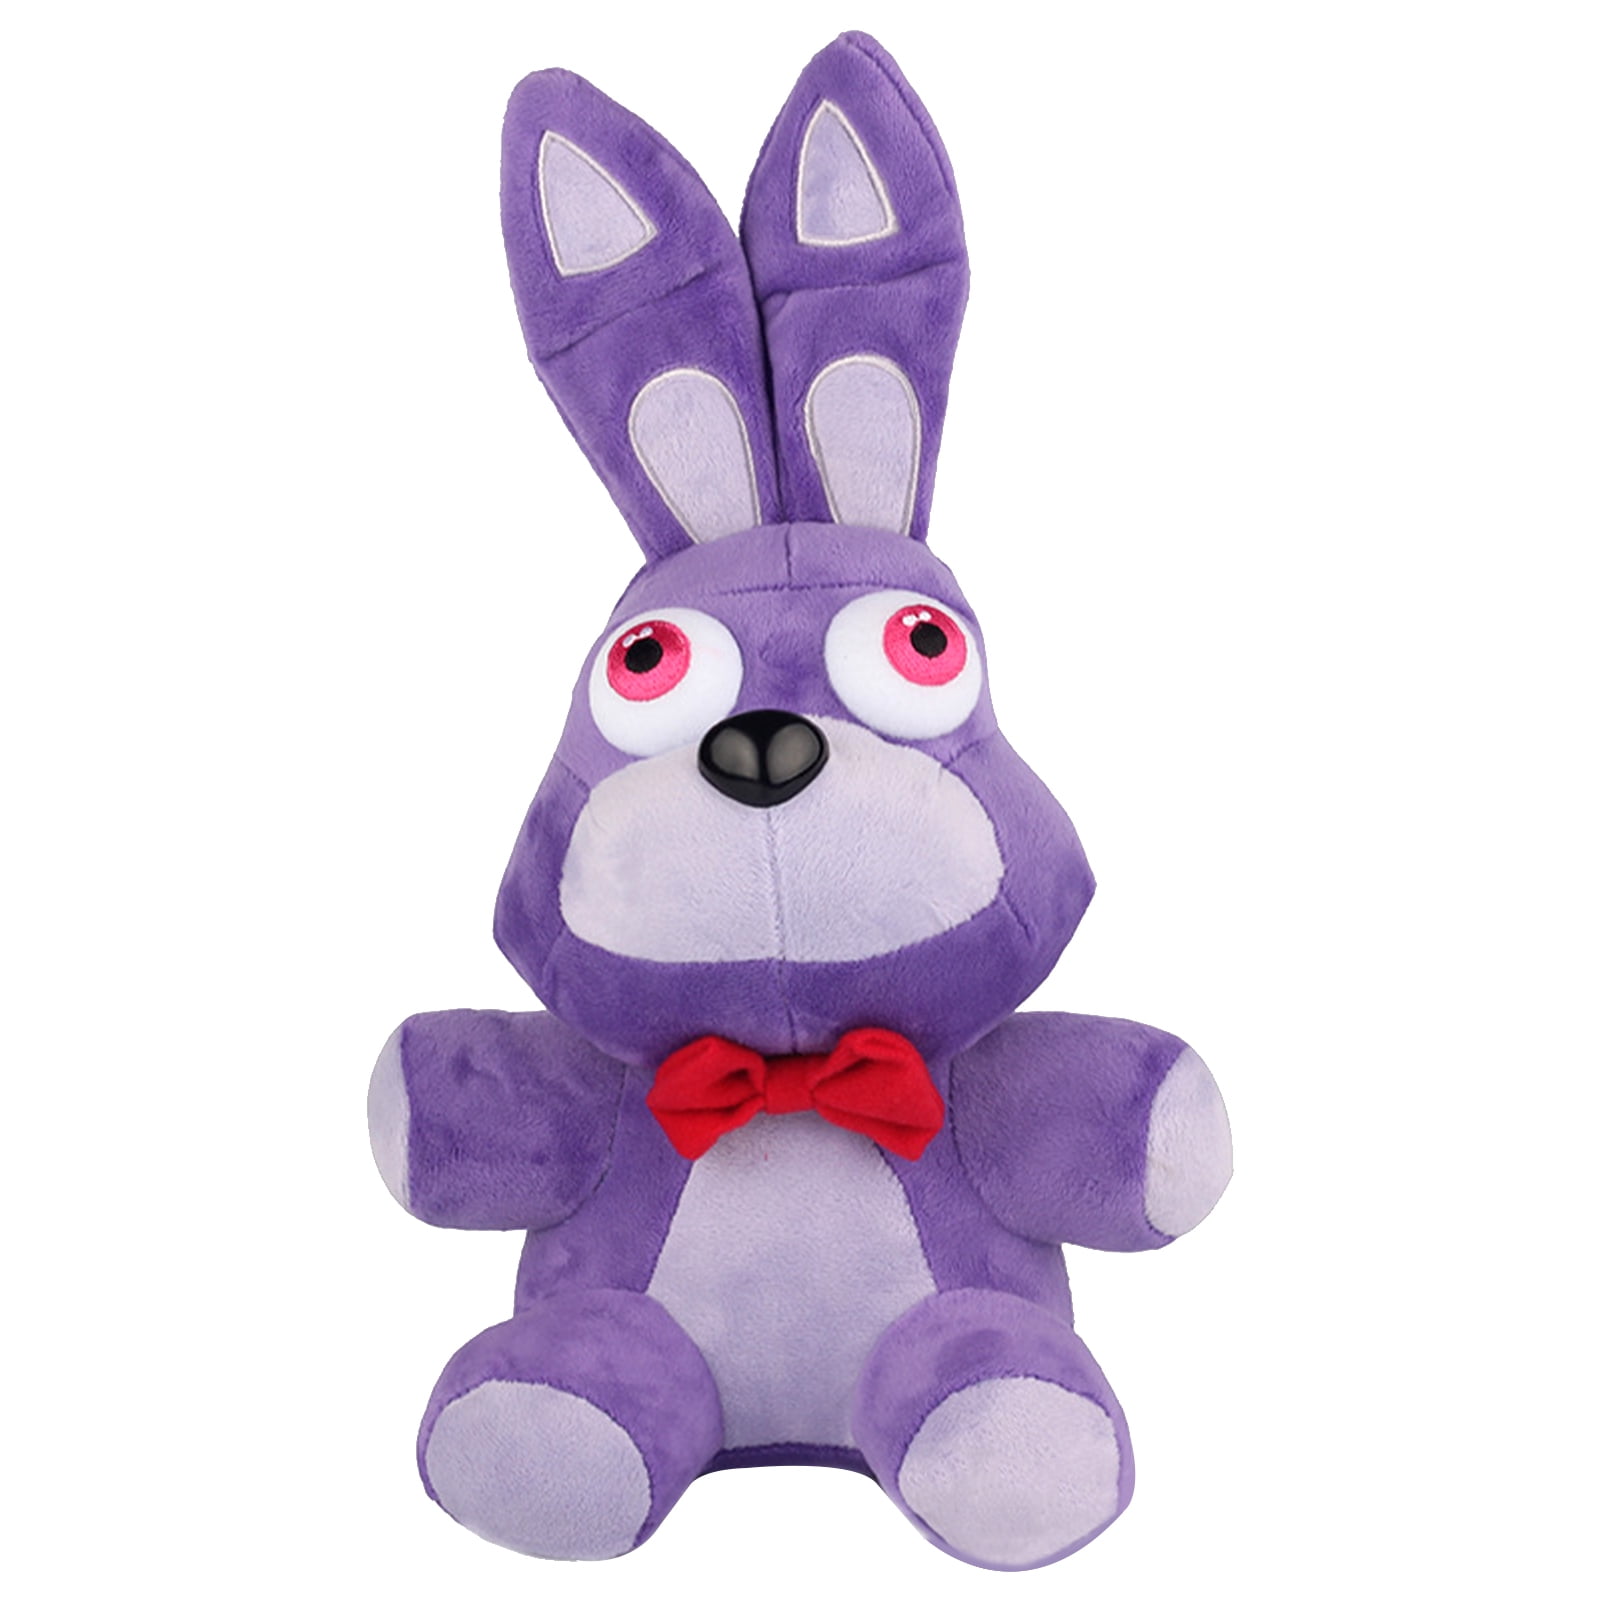 Details about   NEW Fnaf Five Night's At Freddy's Chocolate Bonnie Plush Doll Walmart Exclusive 